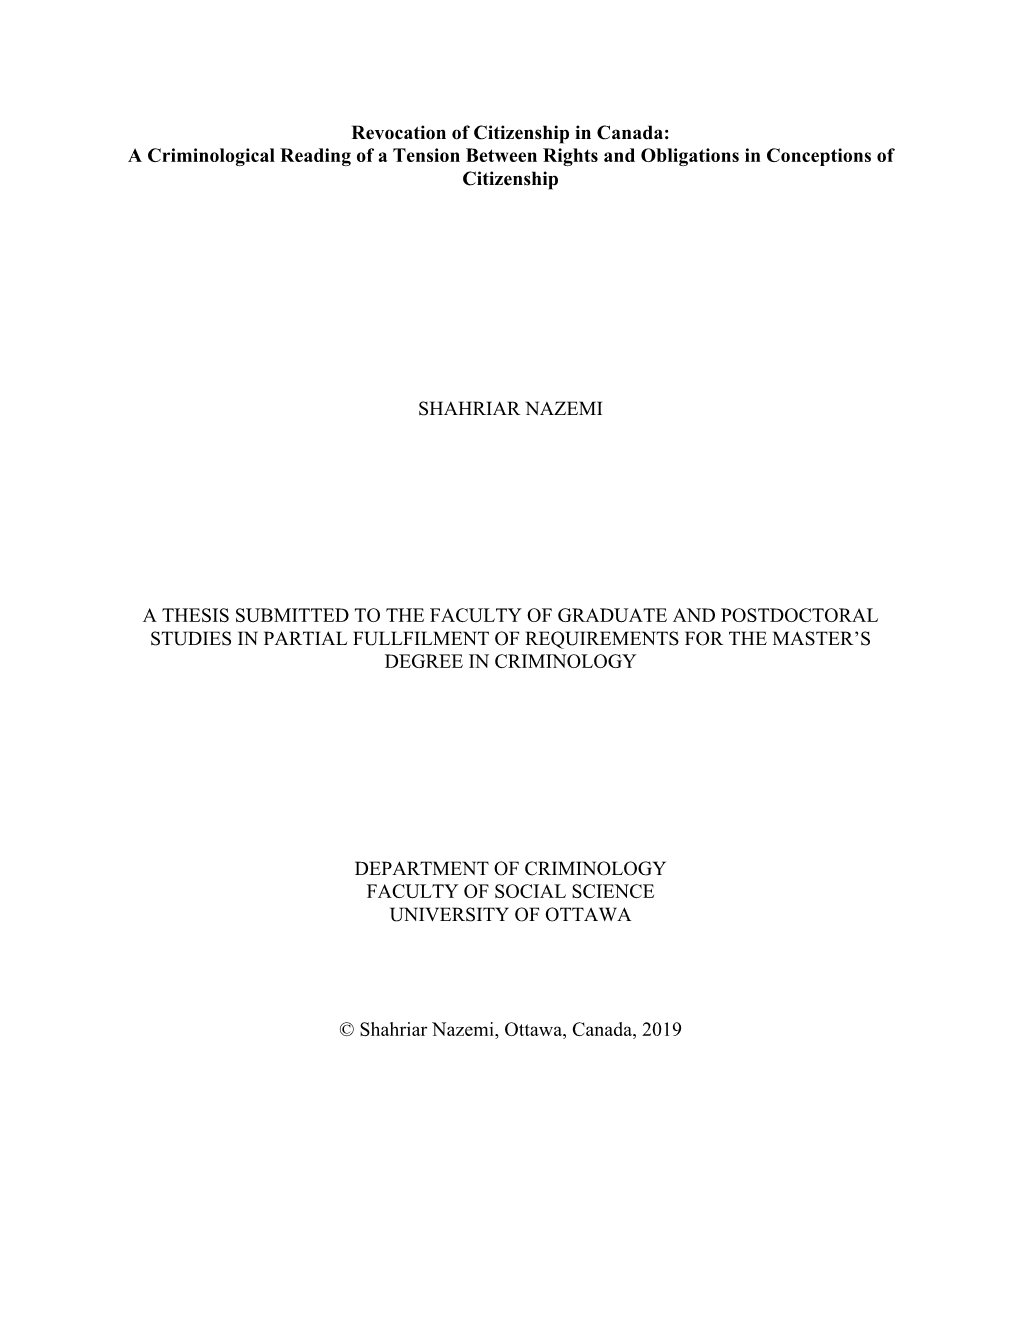 Revocation of Citizenship in Canada: a Criminological Reading of a Tension Between Rights and Obligations in Conceptions of Citizenship